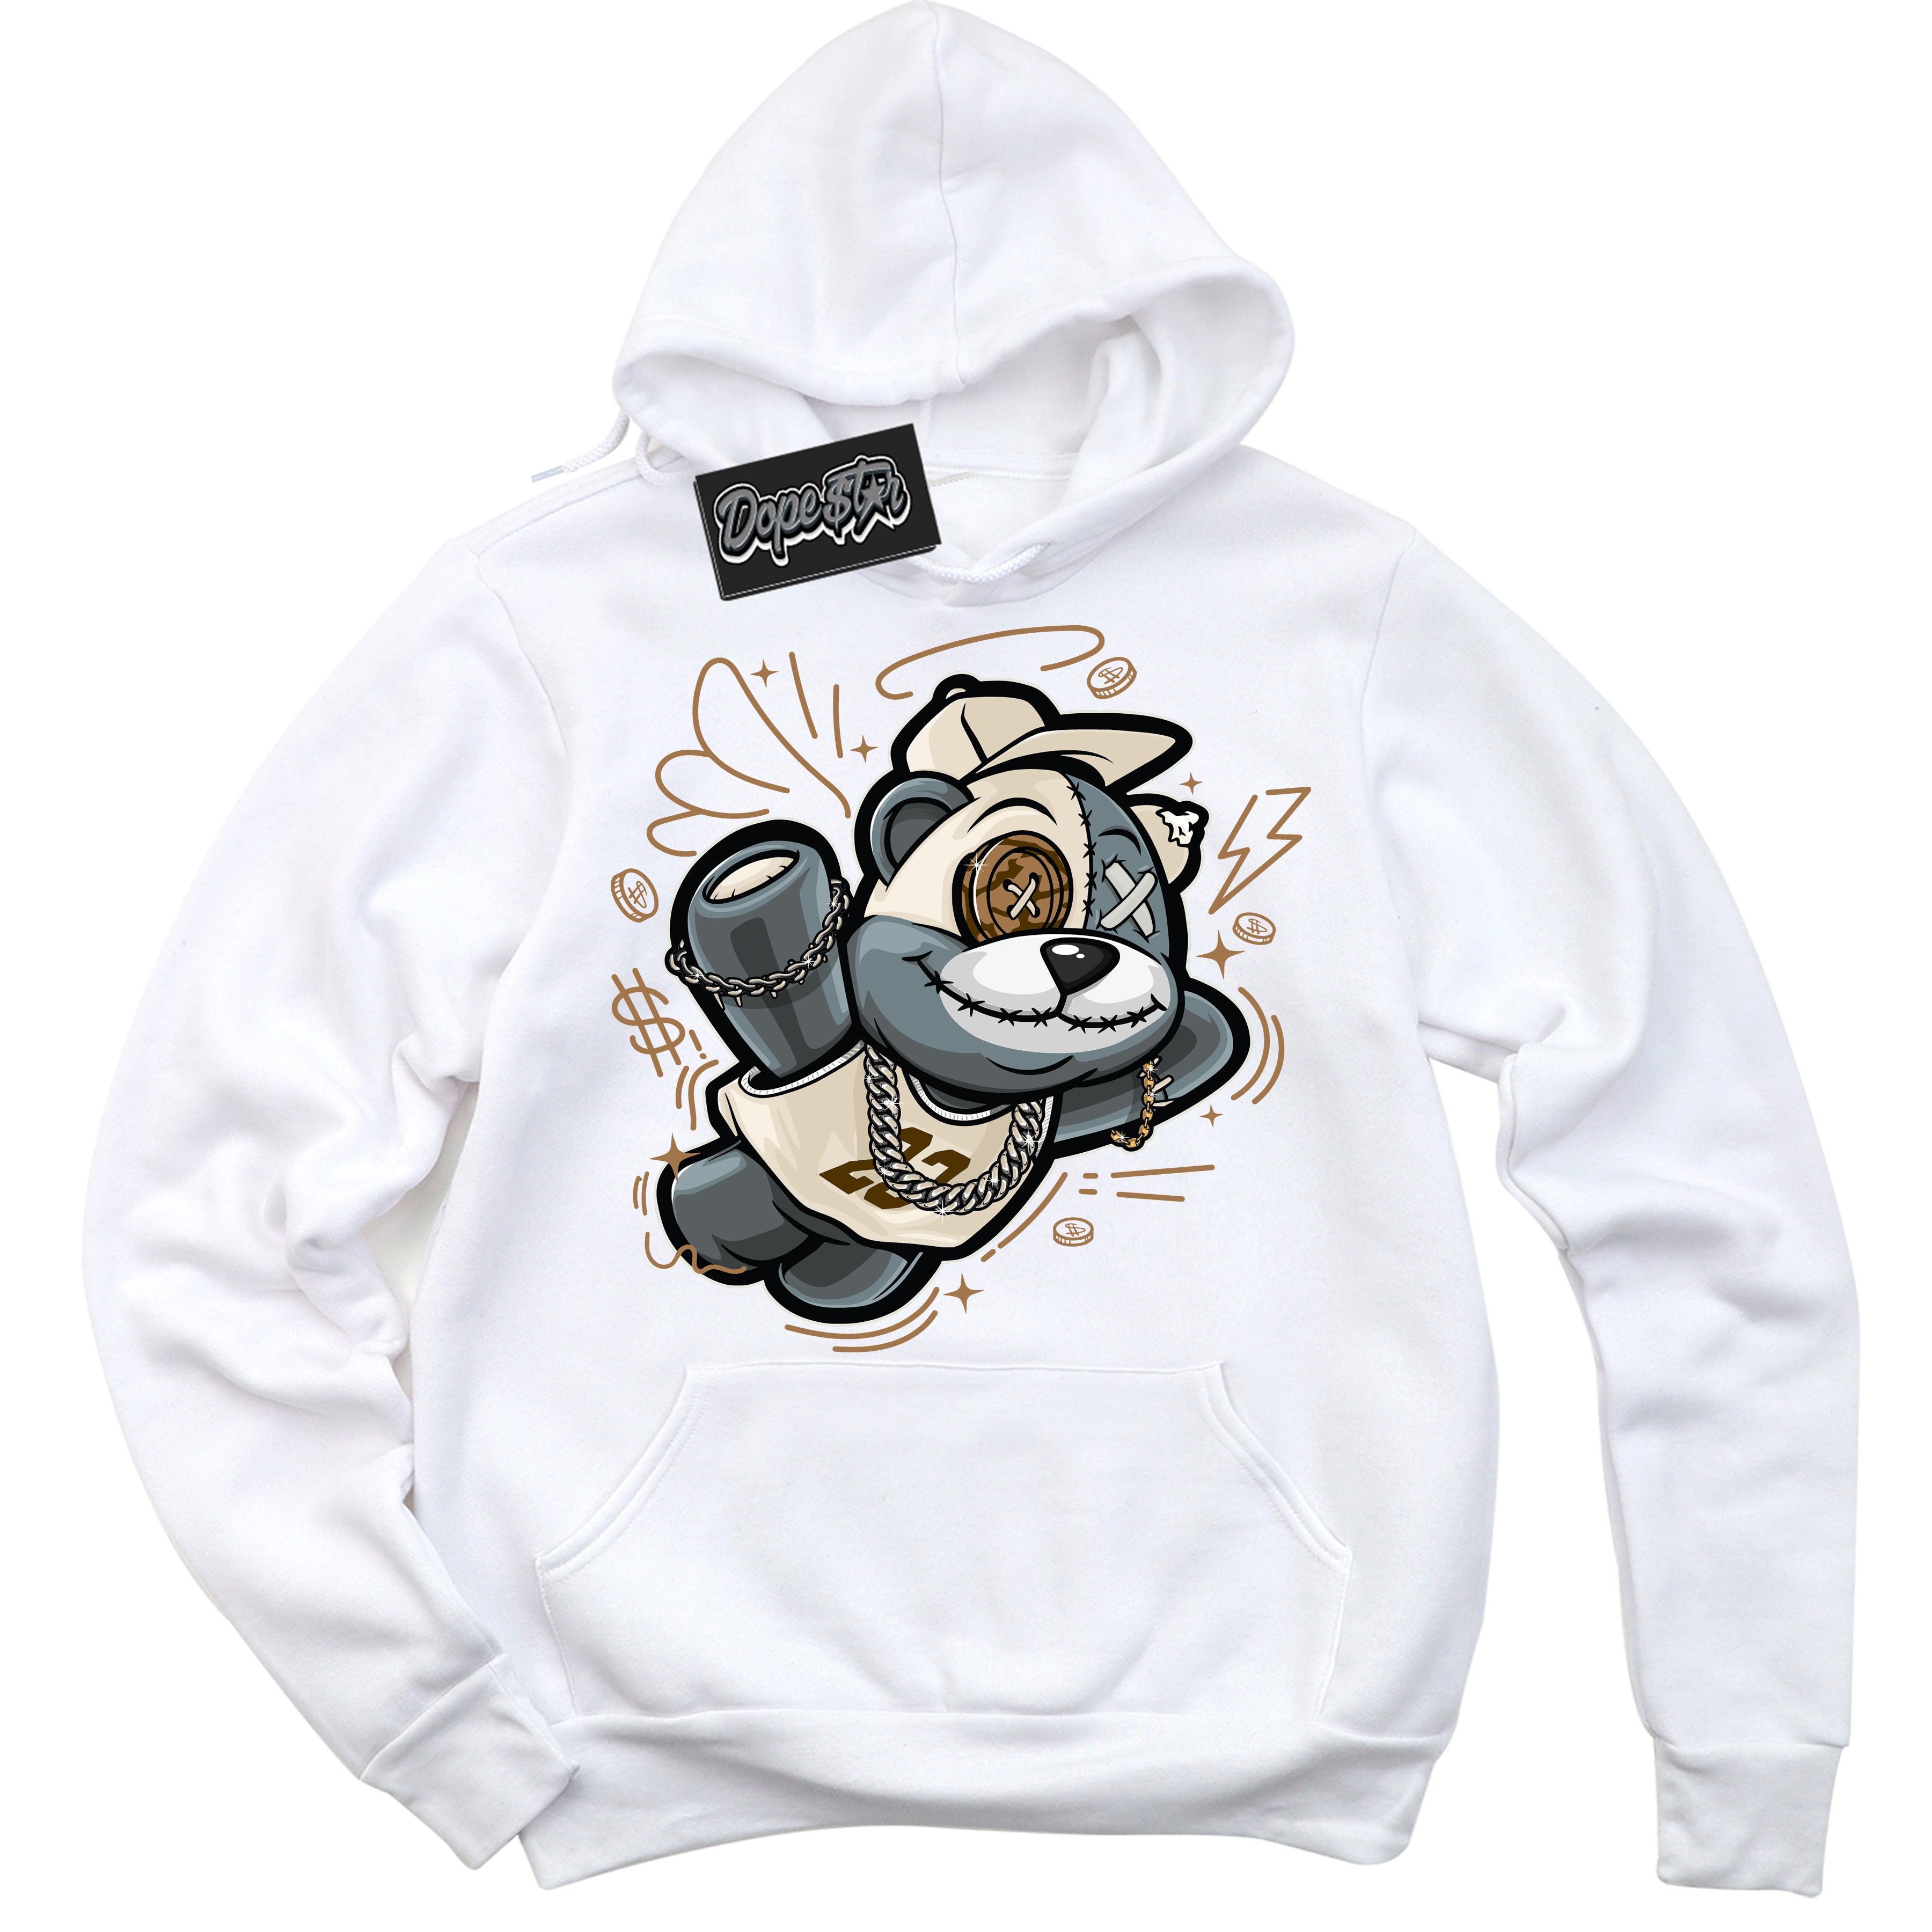 Cool White Graphic DopeStar Hoodie with “ Slam Dunk Bear “ print, that perfectly matches Palomino 3s sneakers